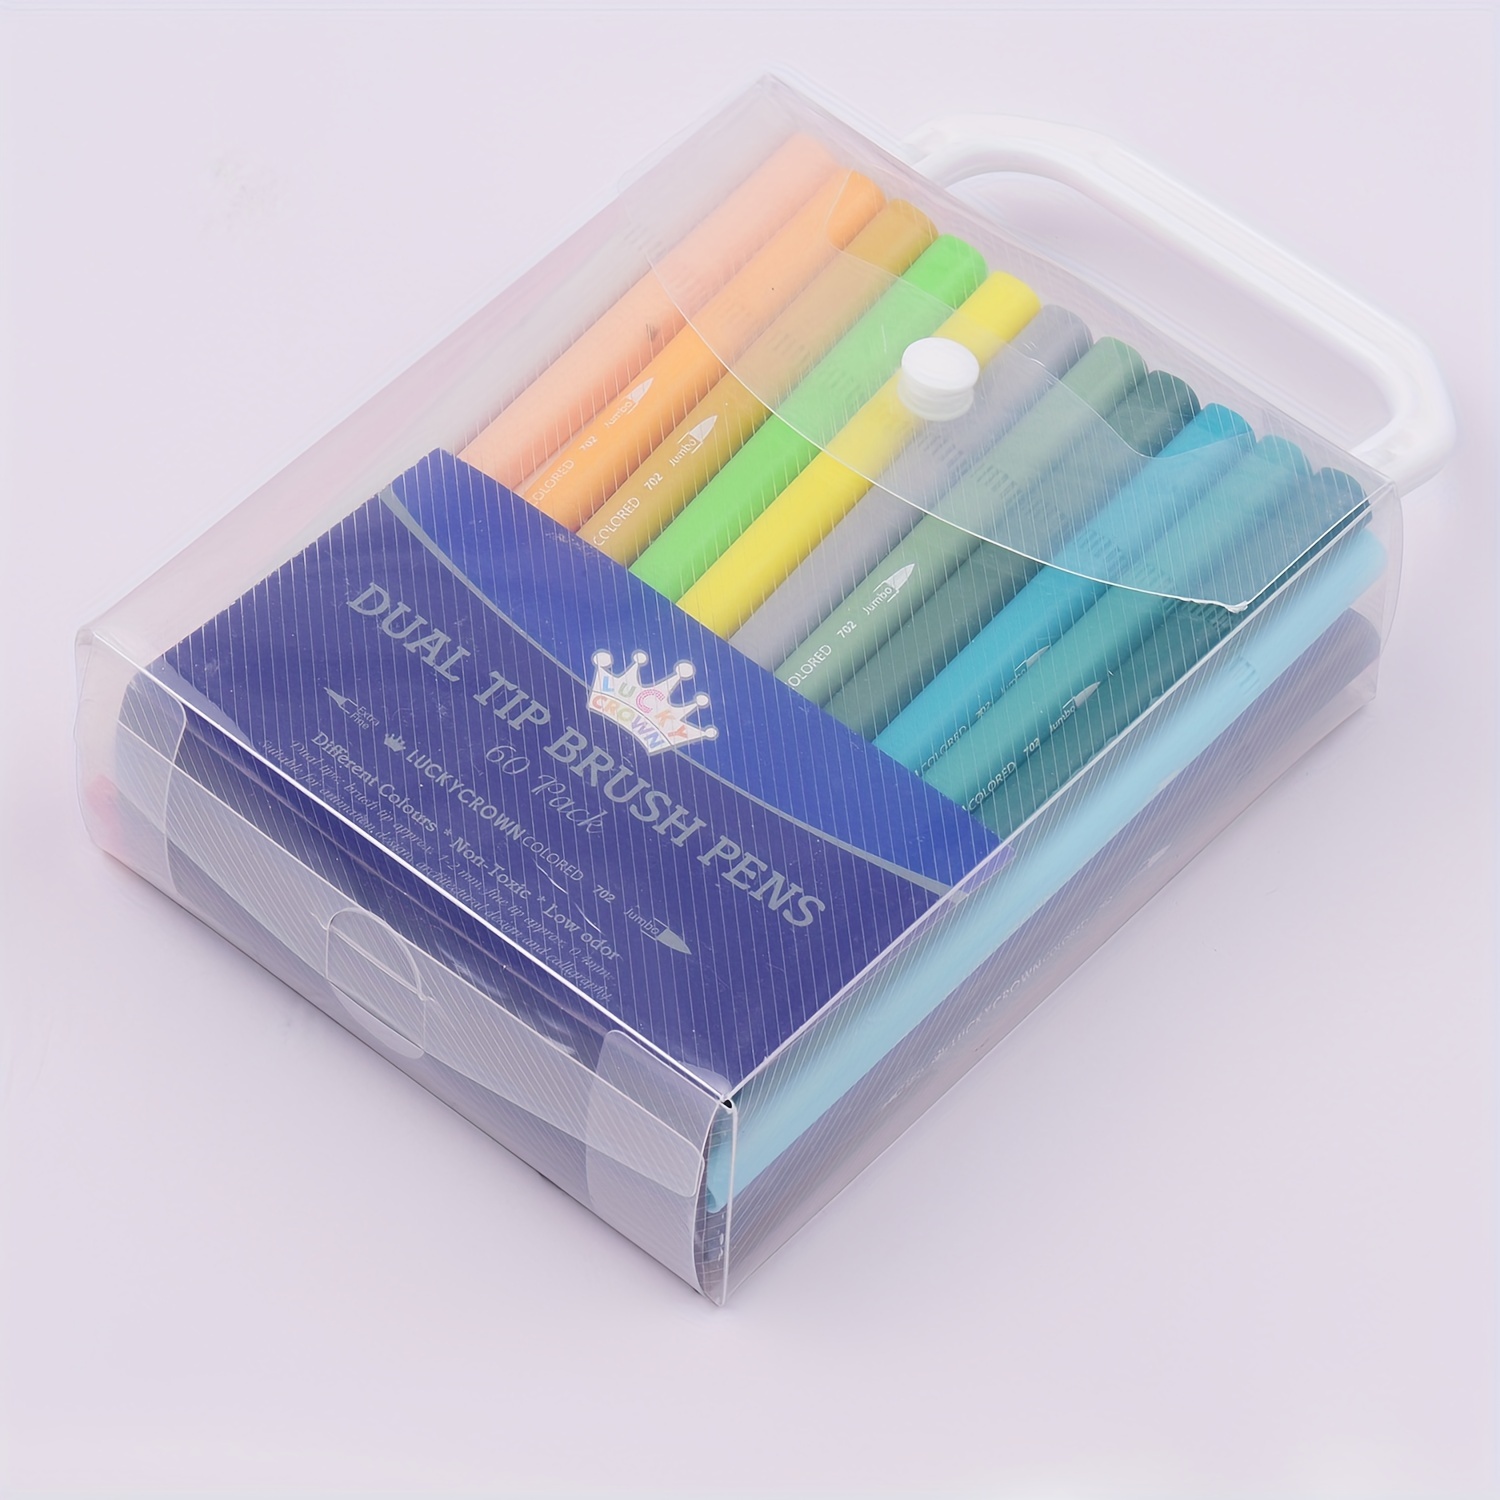 ALI'S ART MARKERS, Alcohol Markers, Dual Tip Double Ended Marker, 60  Colours, Clear Plastic Storage Case, Drawing, Sketching: Markers